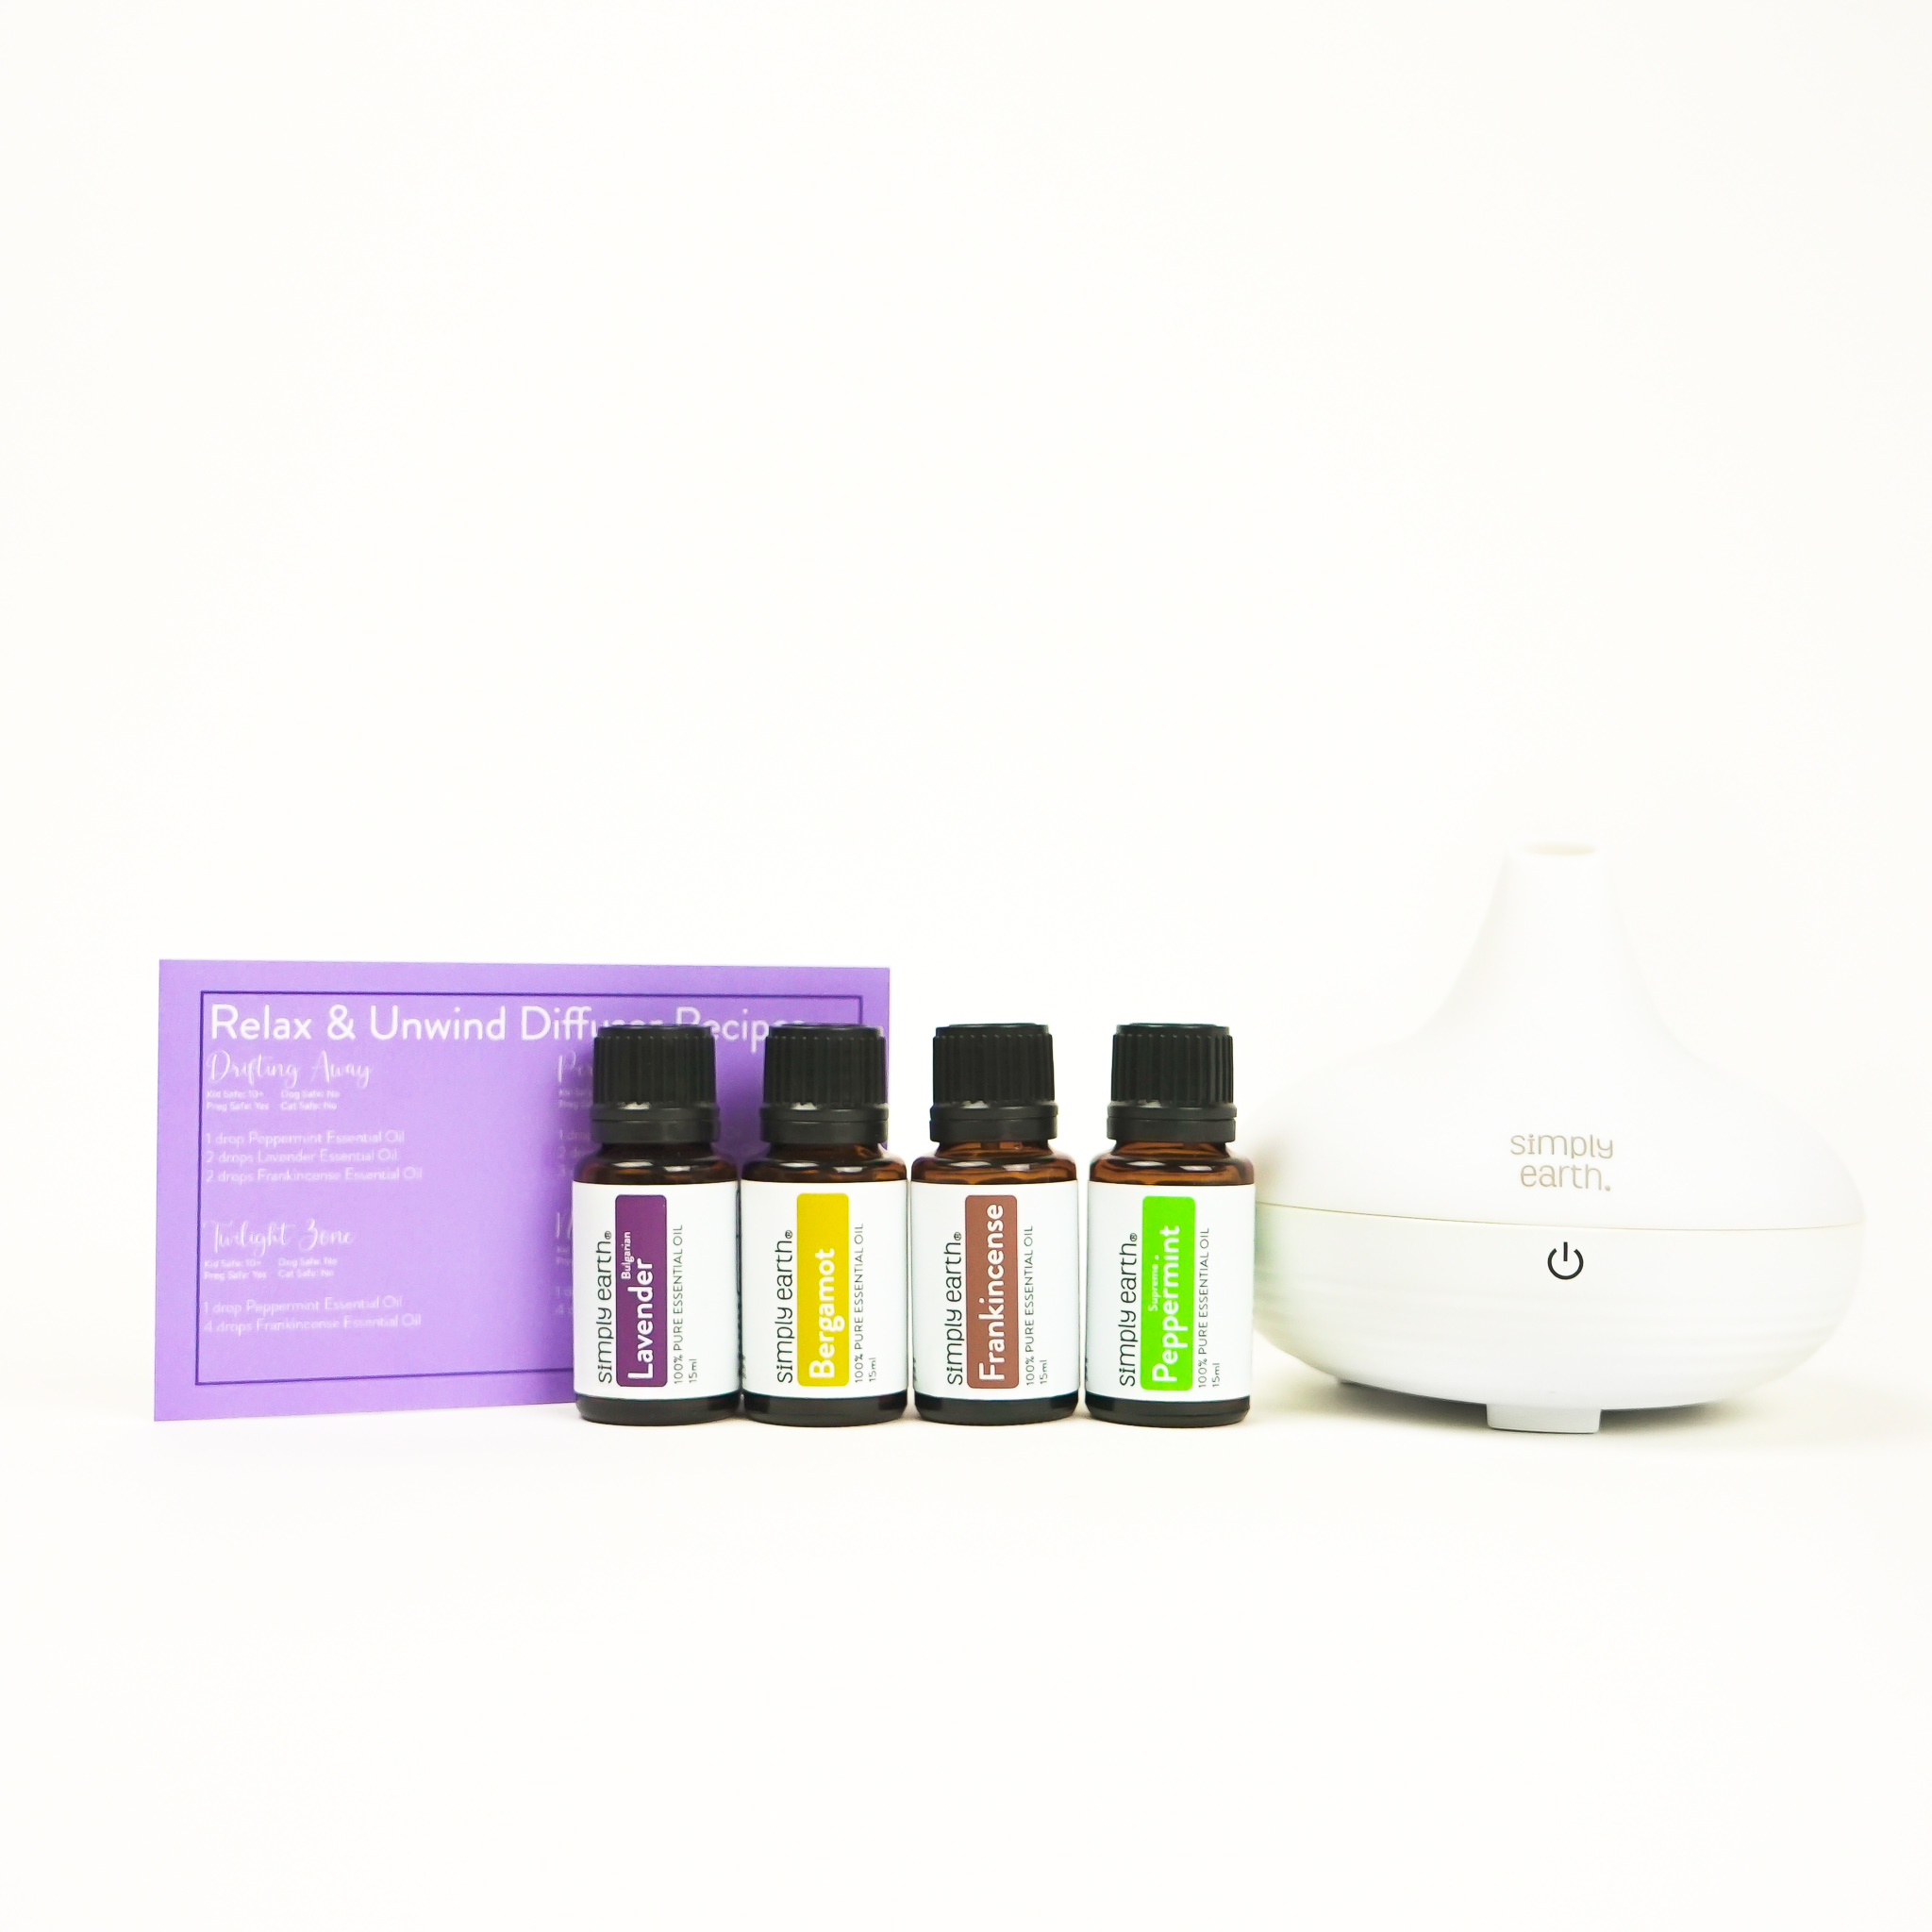 Relax and Unwind Diffuser Set Set: Deluxe (with diffuser)